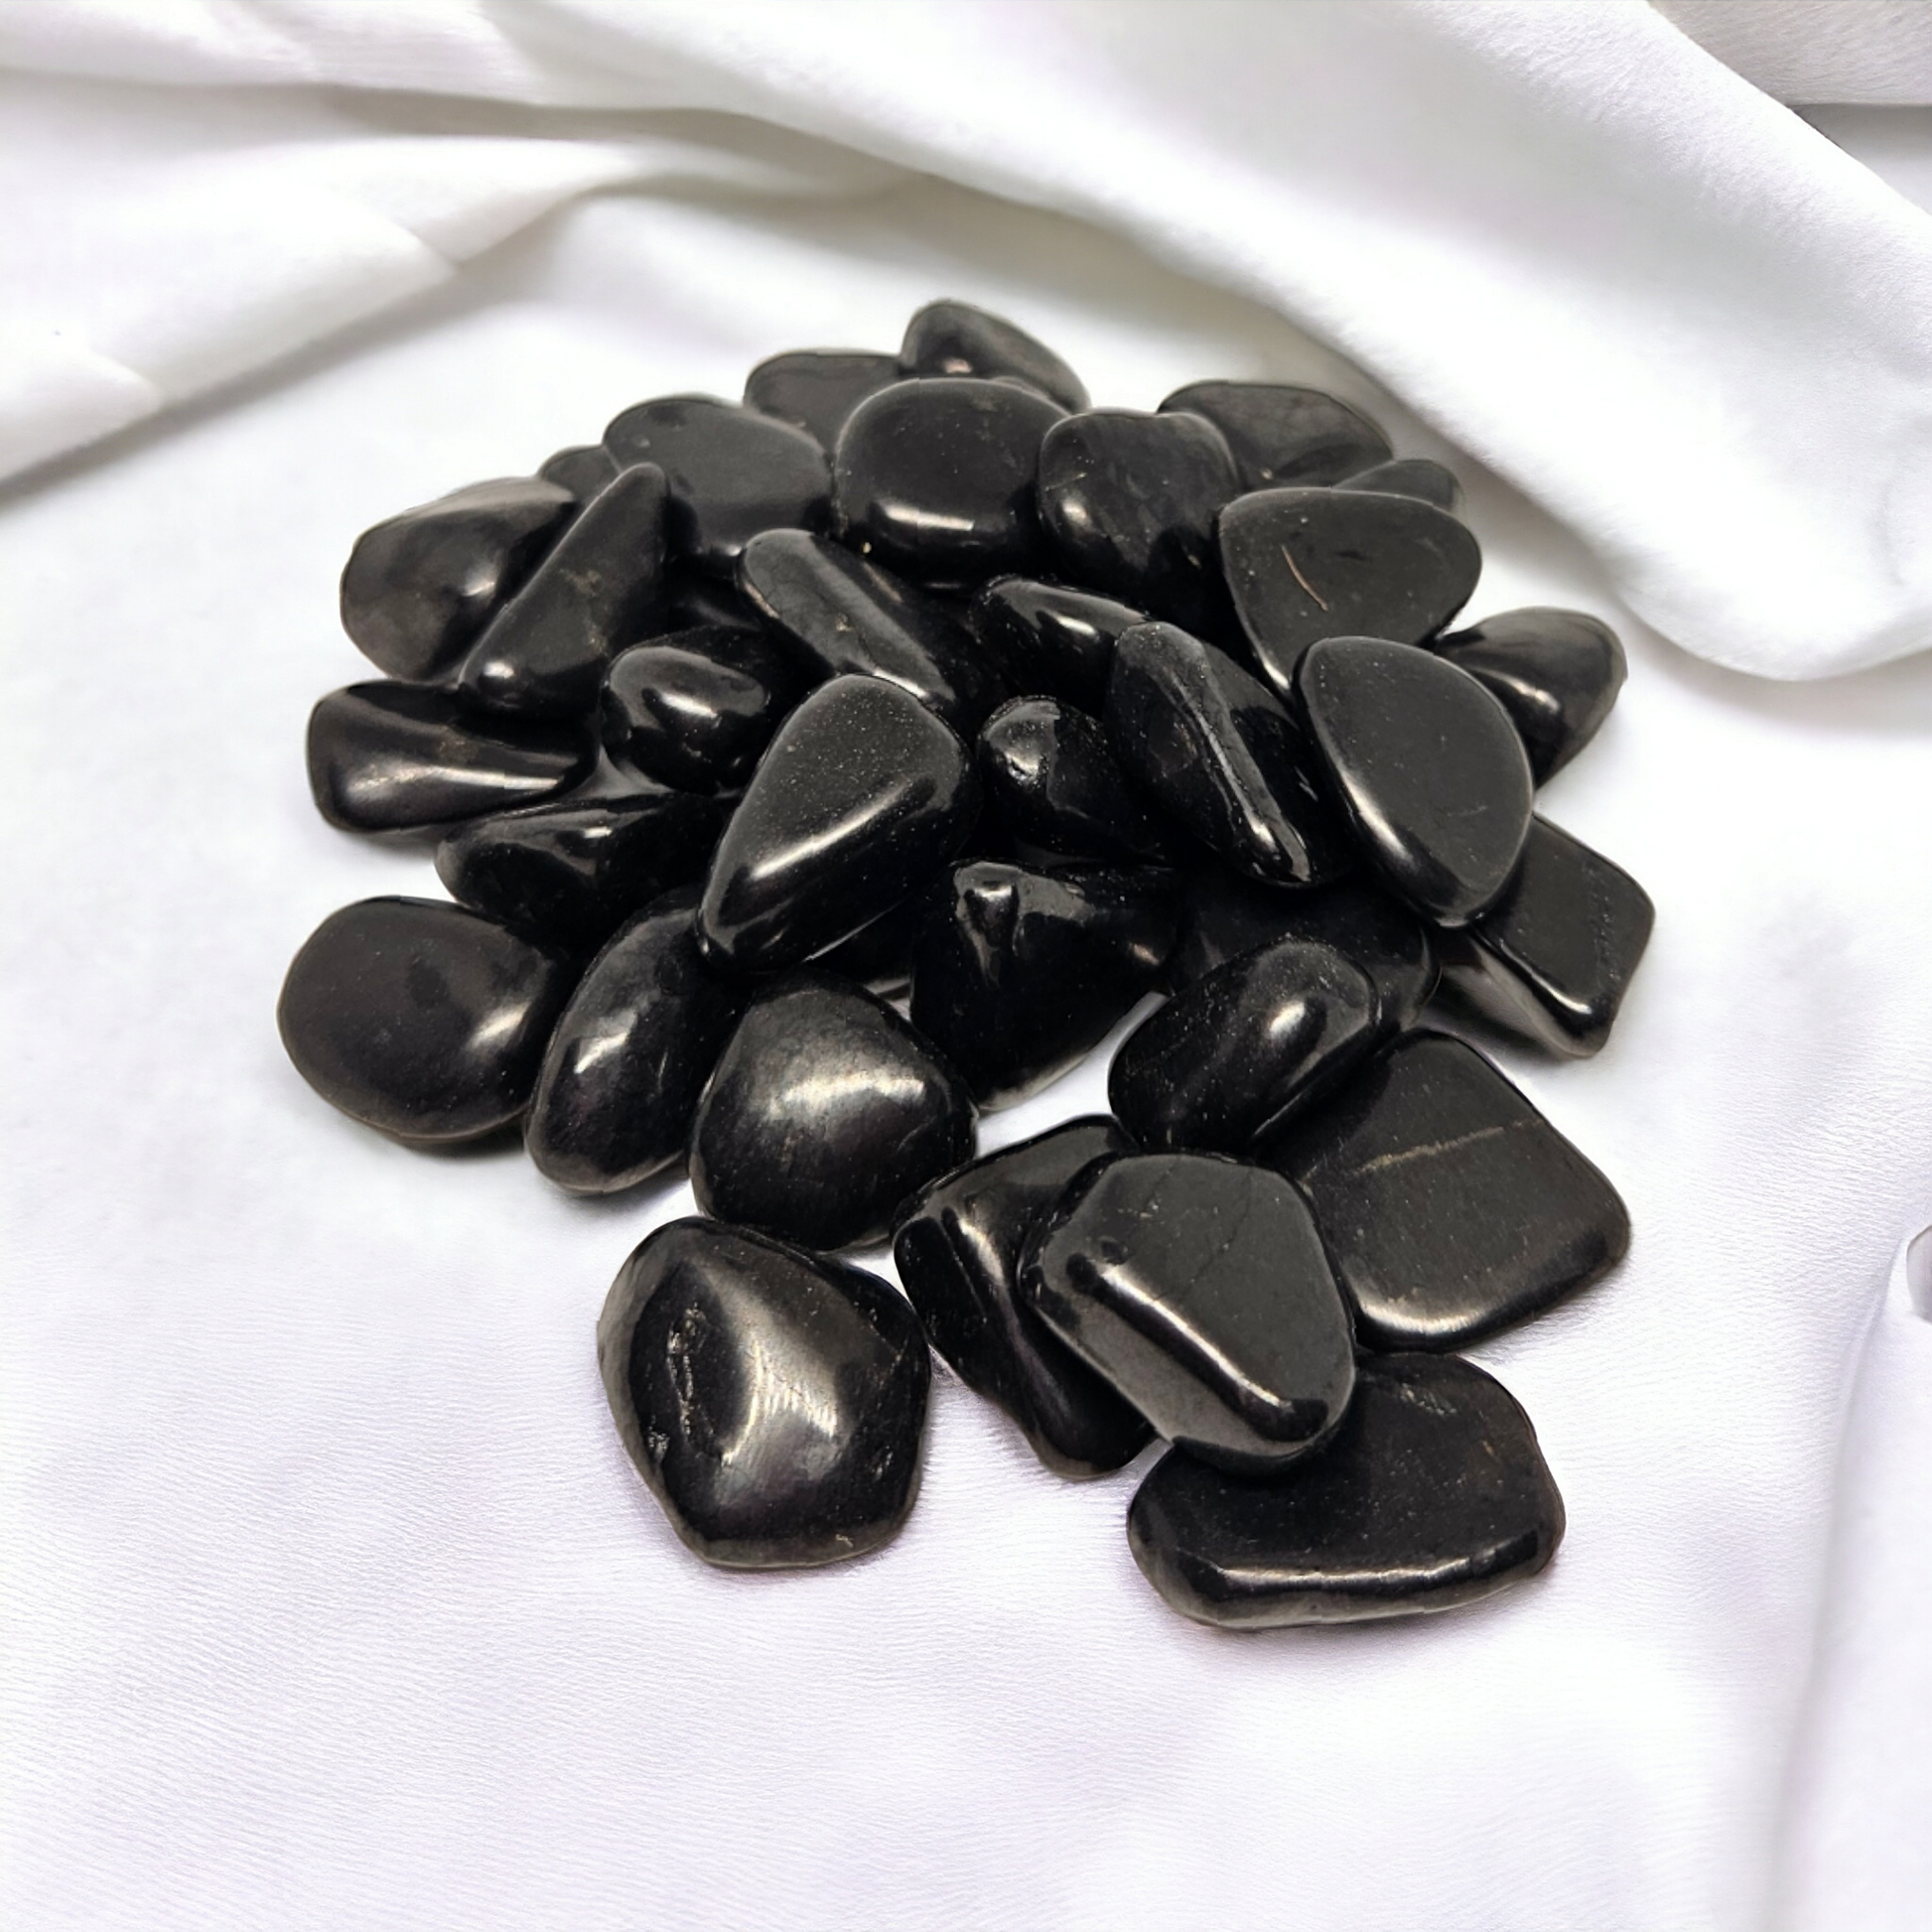 Shungite crystals sold at Mind Soul Sync crystal shop in Dubbo.